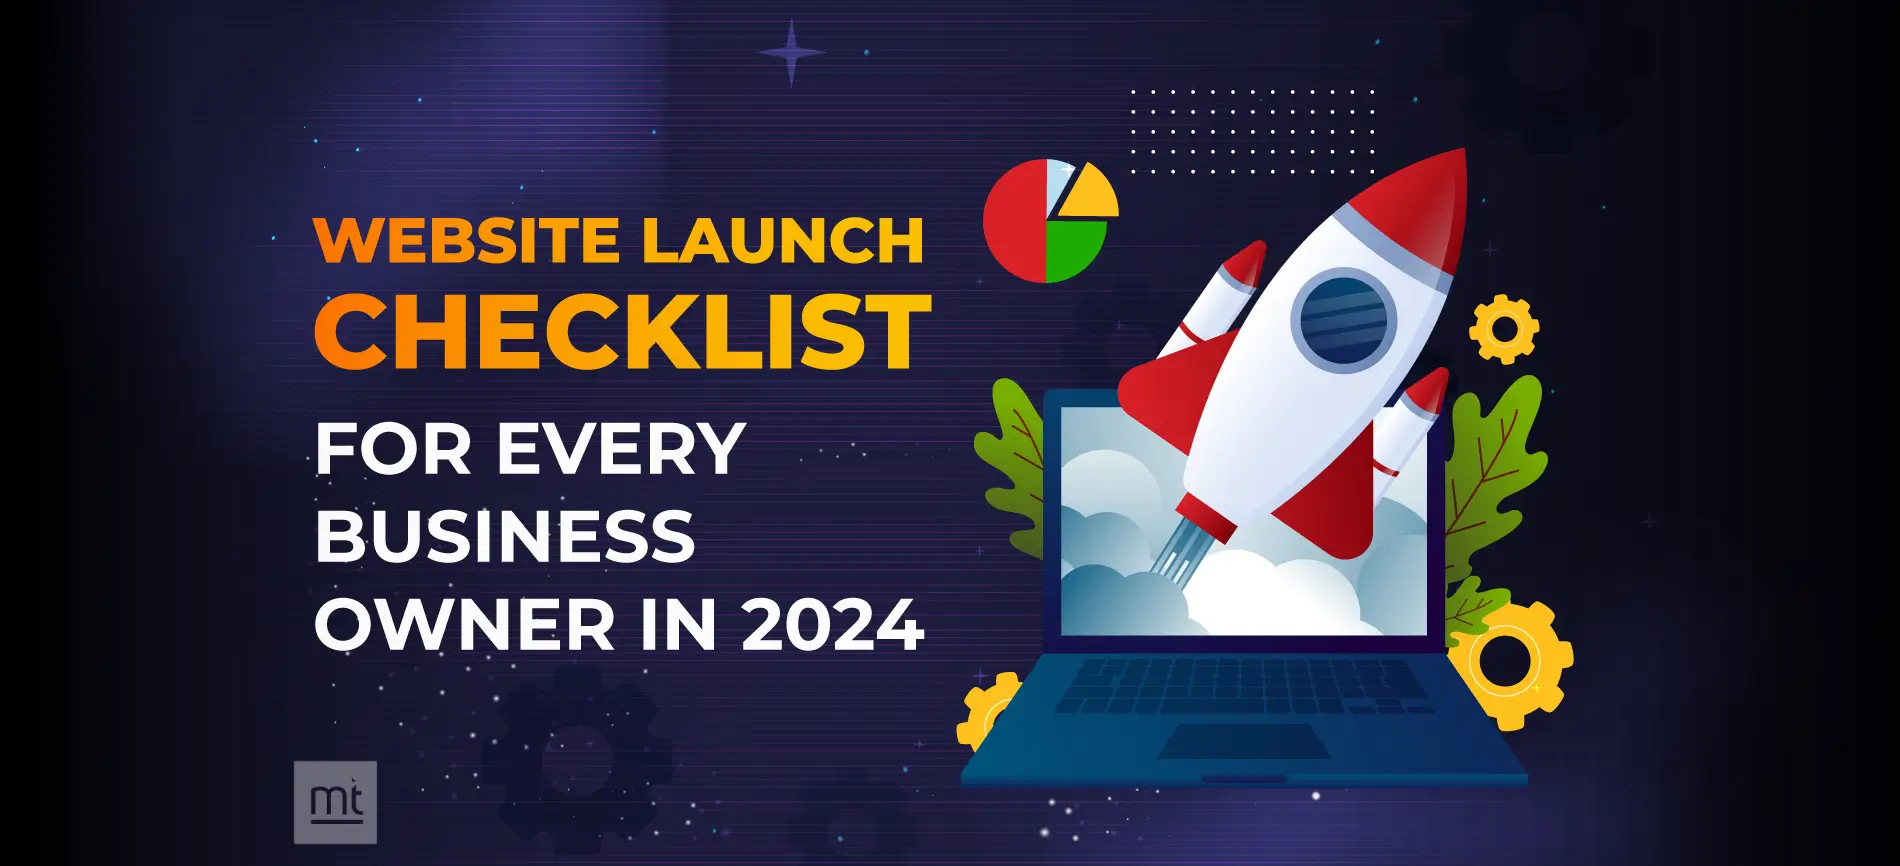 Ultimate Website Launch Checklist for Every Business Owner in 2024 (Pre-Launch and Post-Launch)